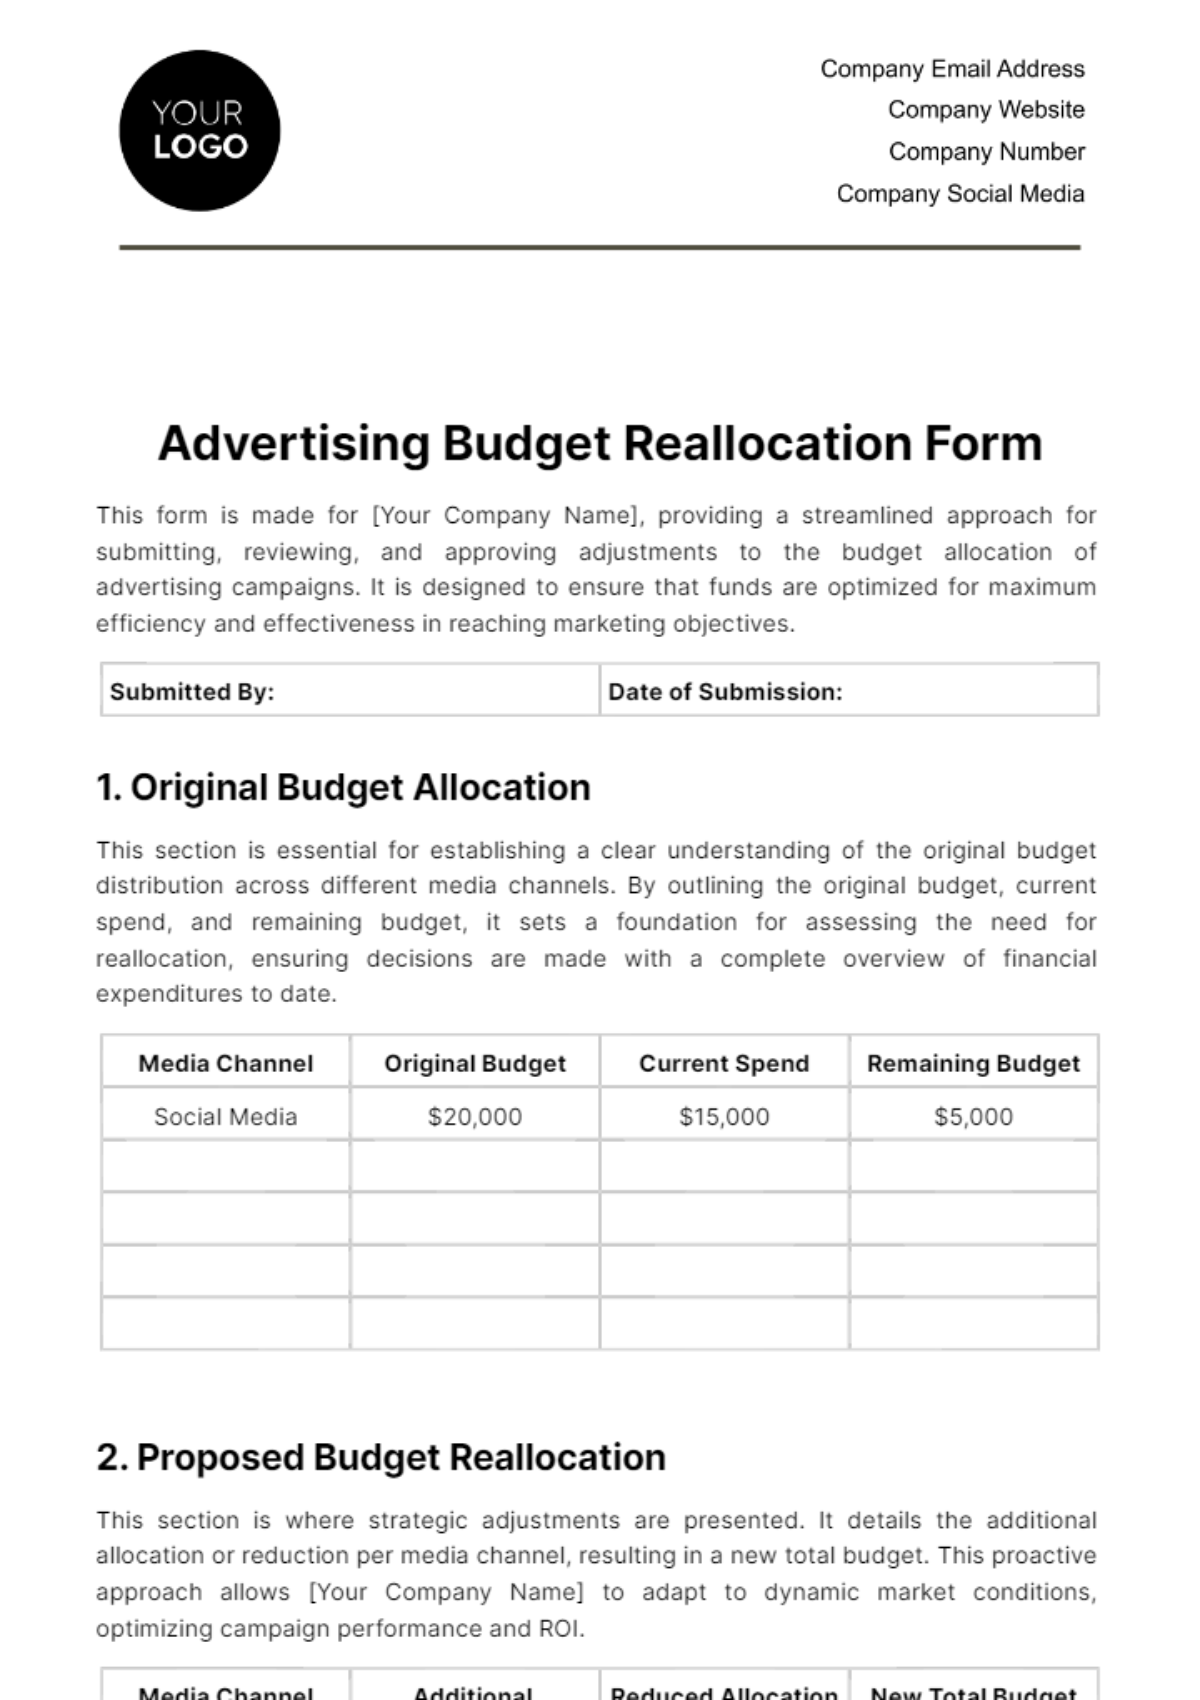 Free Advertising Budget Reallocation Form Template